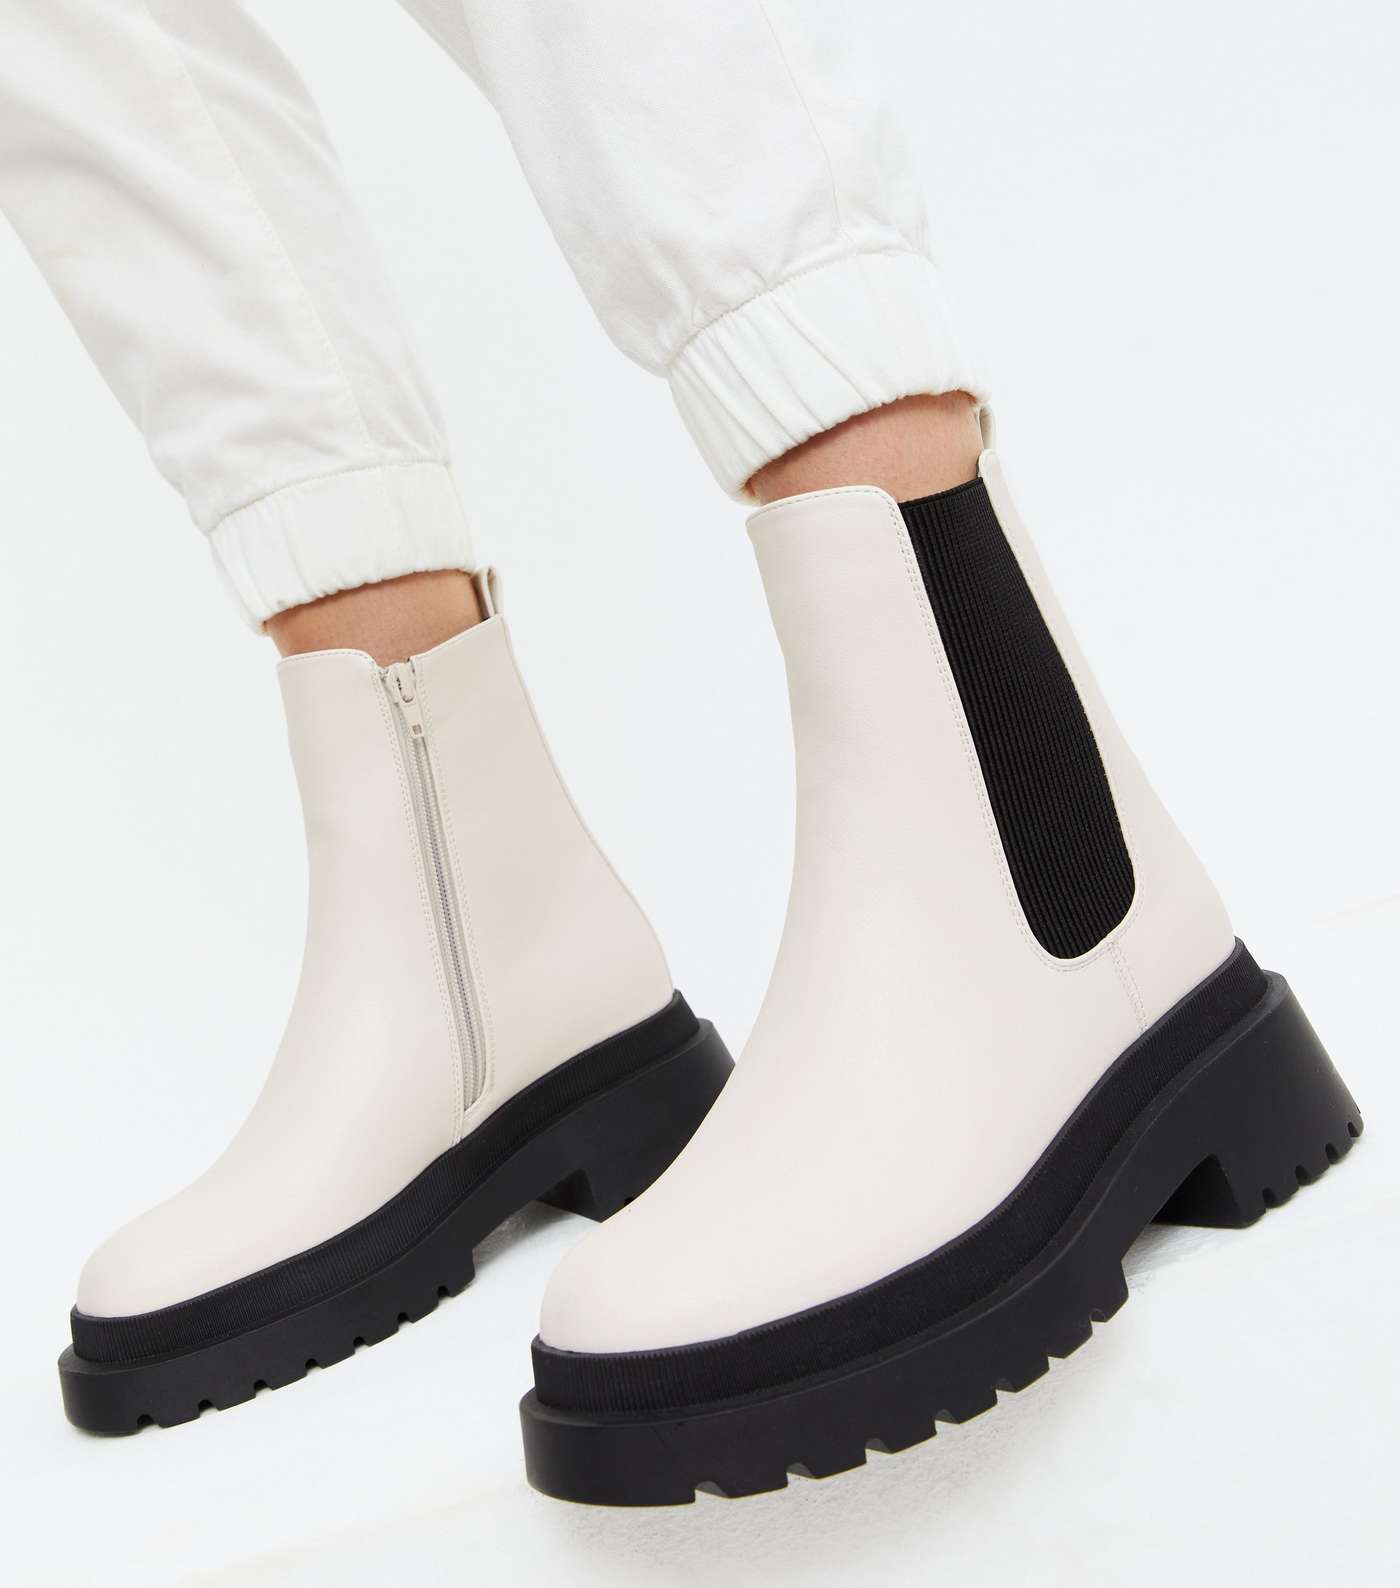 Off White Leather-Look High Ankle Chelsea Boots Image 2